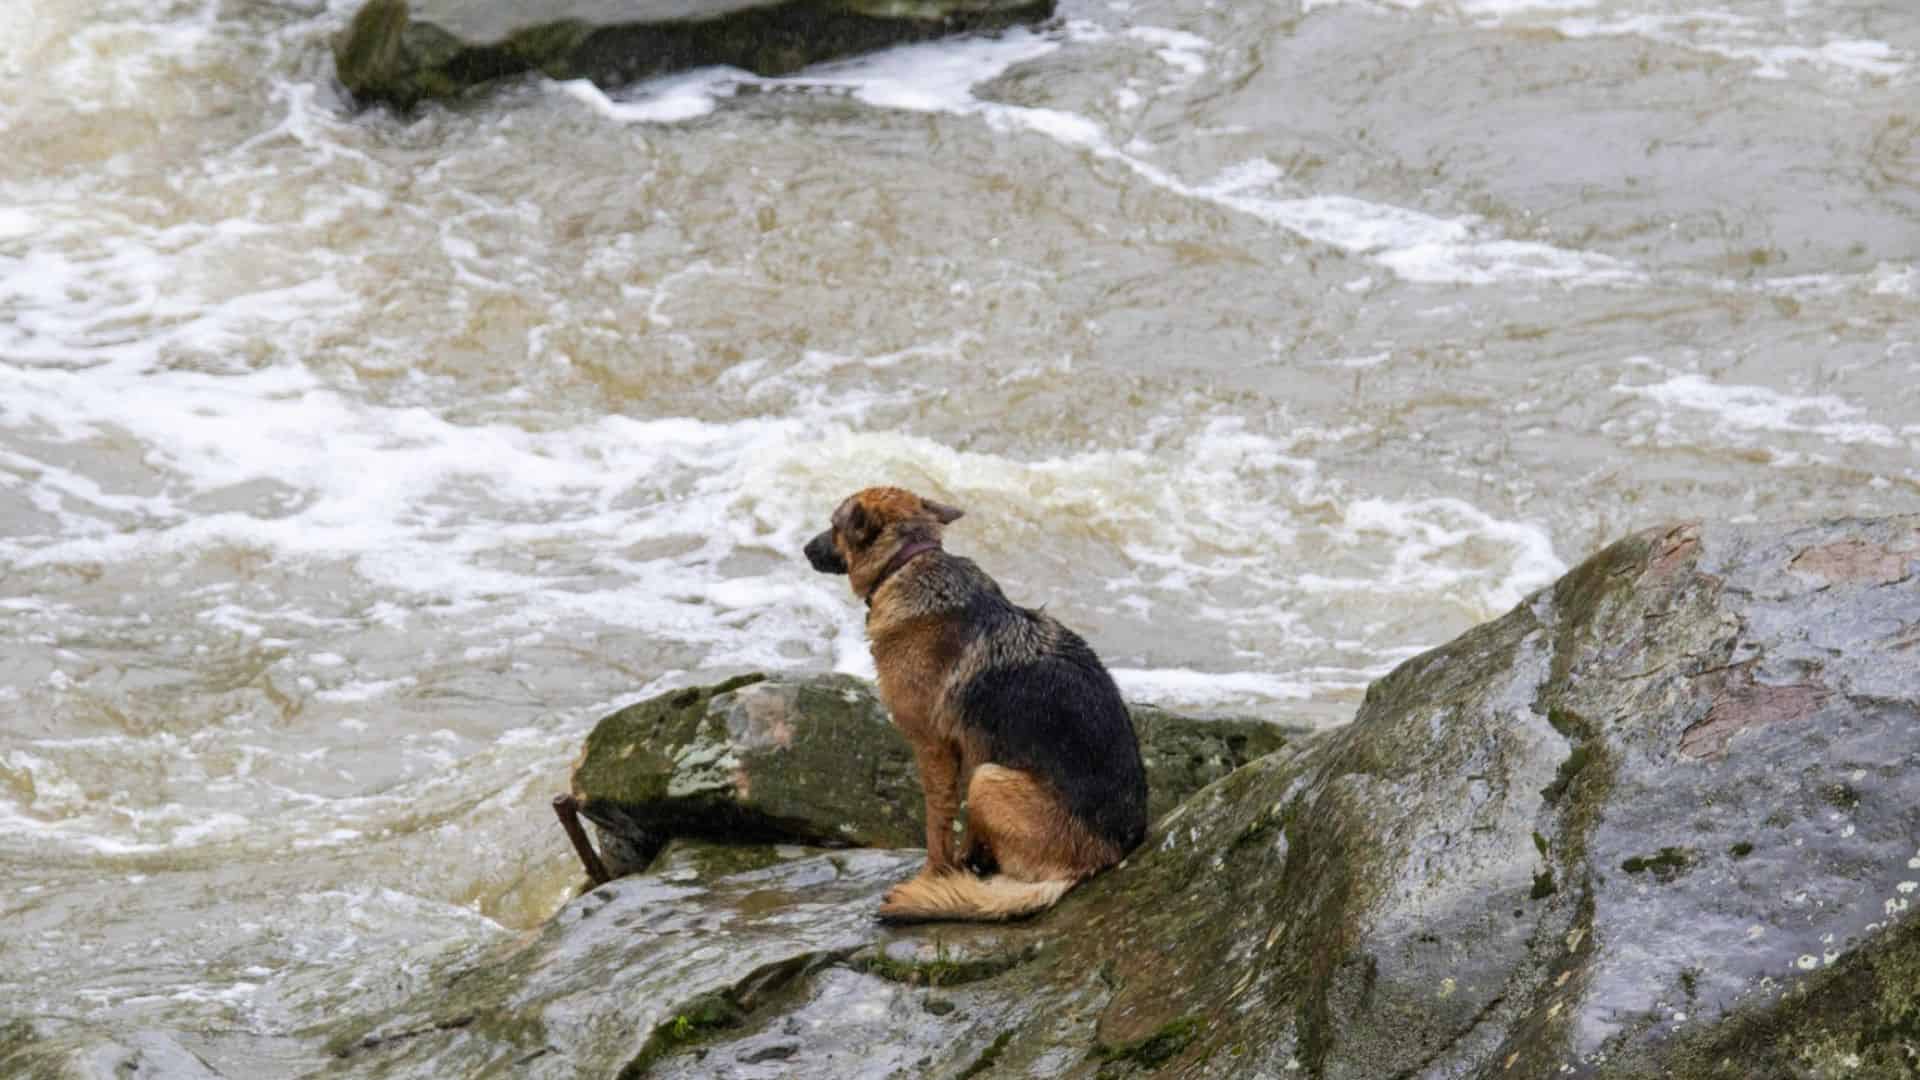 Dog Stranded On A Rock In The Middle Of A River With Rapid Currents Gets Saved